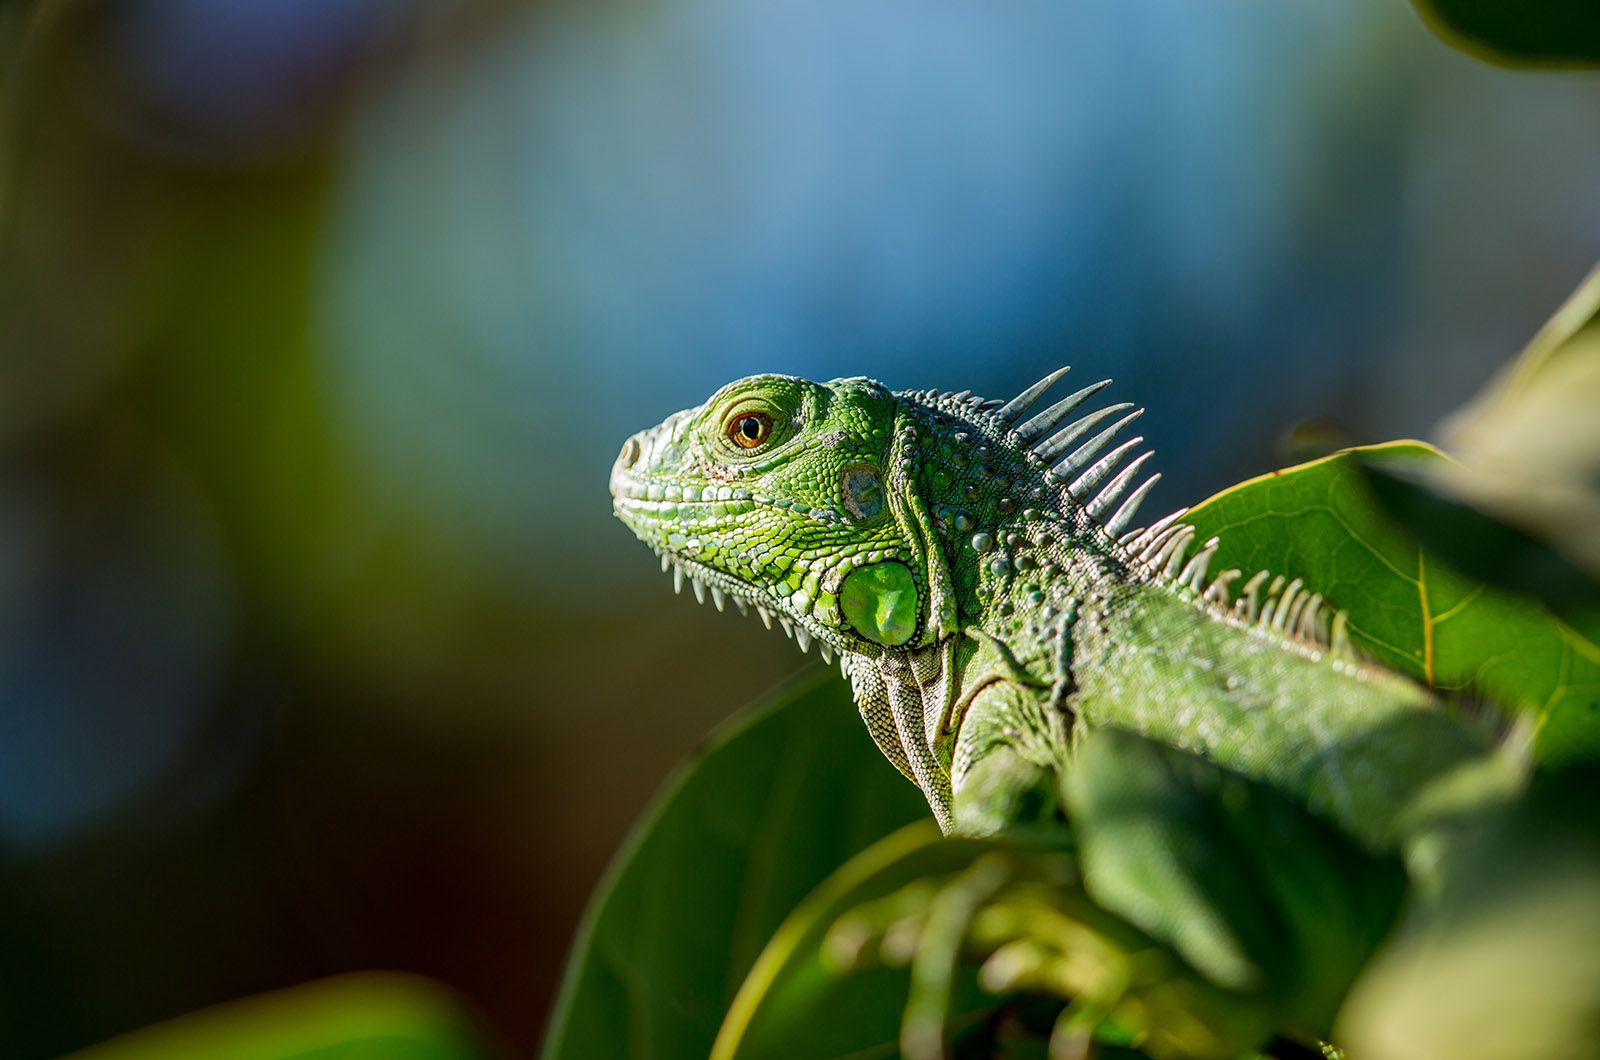 Protecting The Iguana In Costa Rica